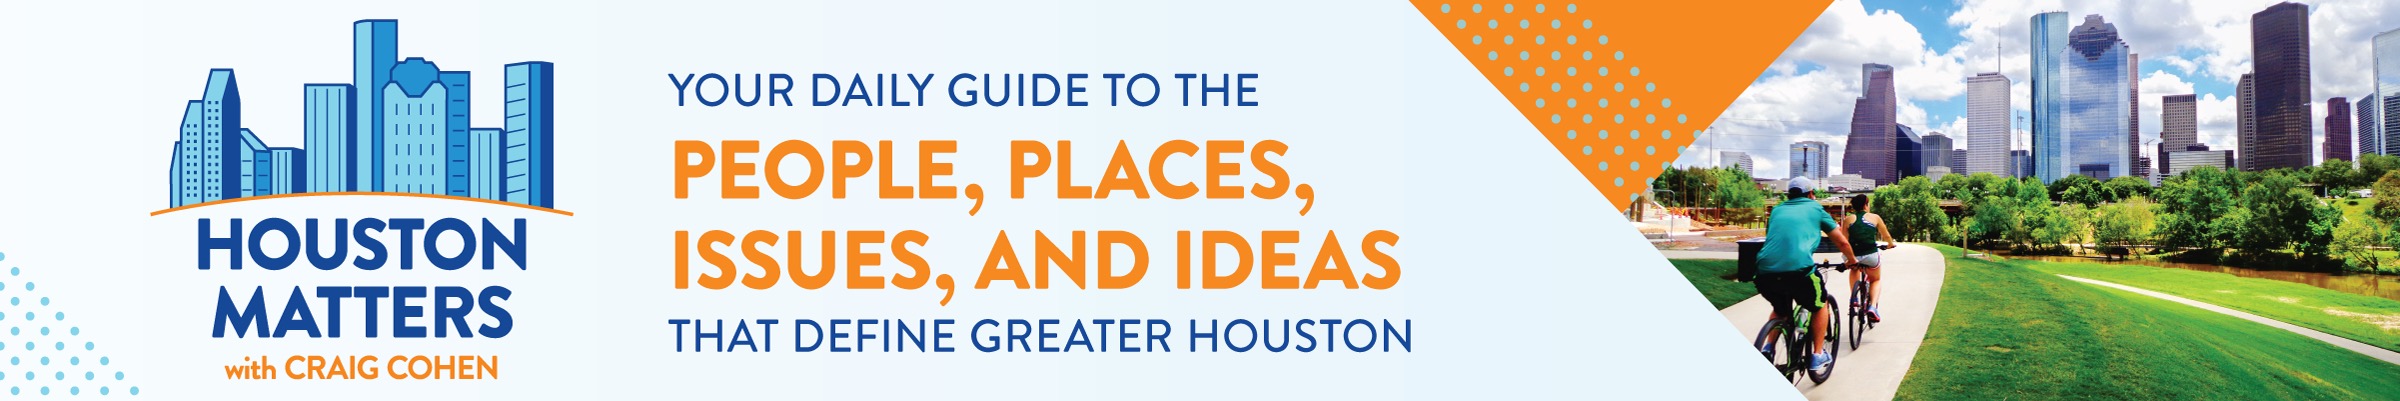 Houston Matters page banner